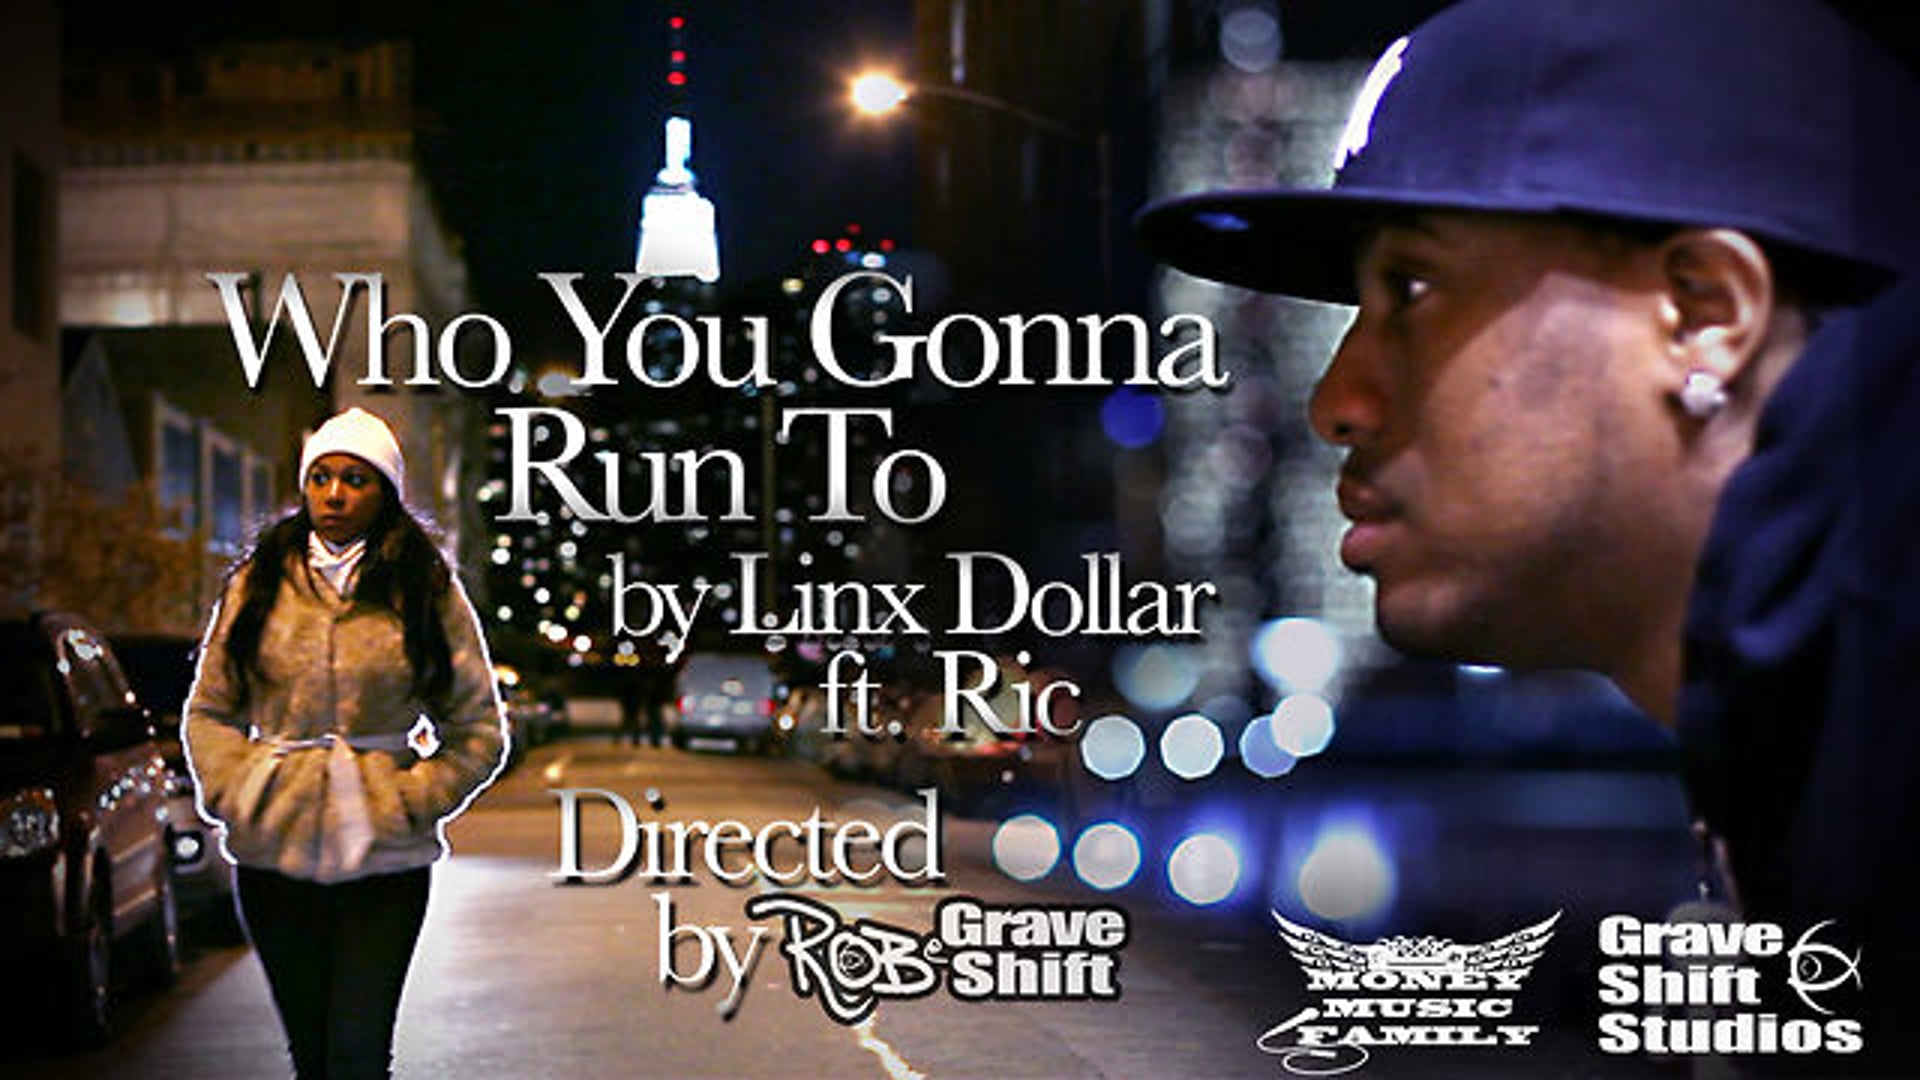 "Who You Gonna Run To" by Linx Dollar ft. Ric (Directed by @ROBatGraveShift)